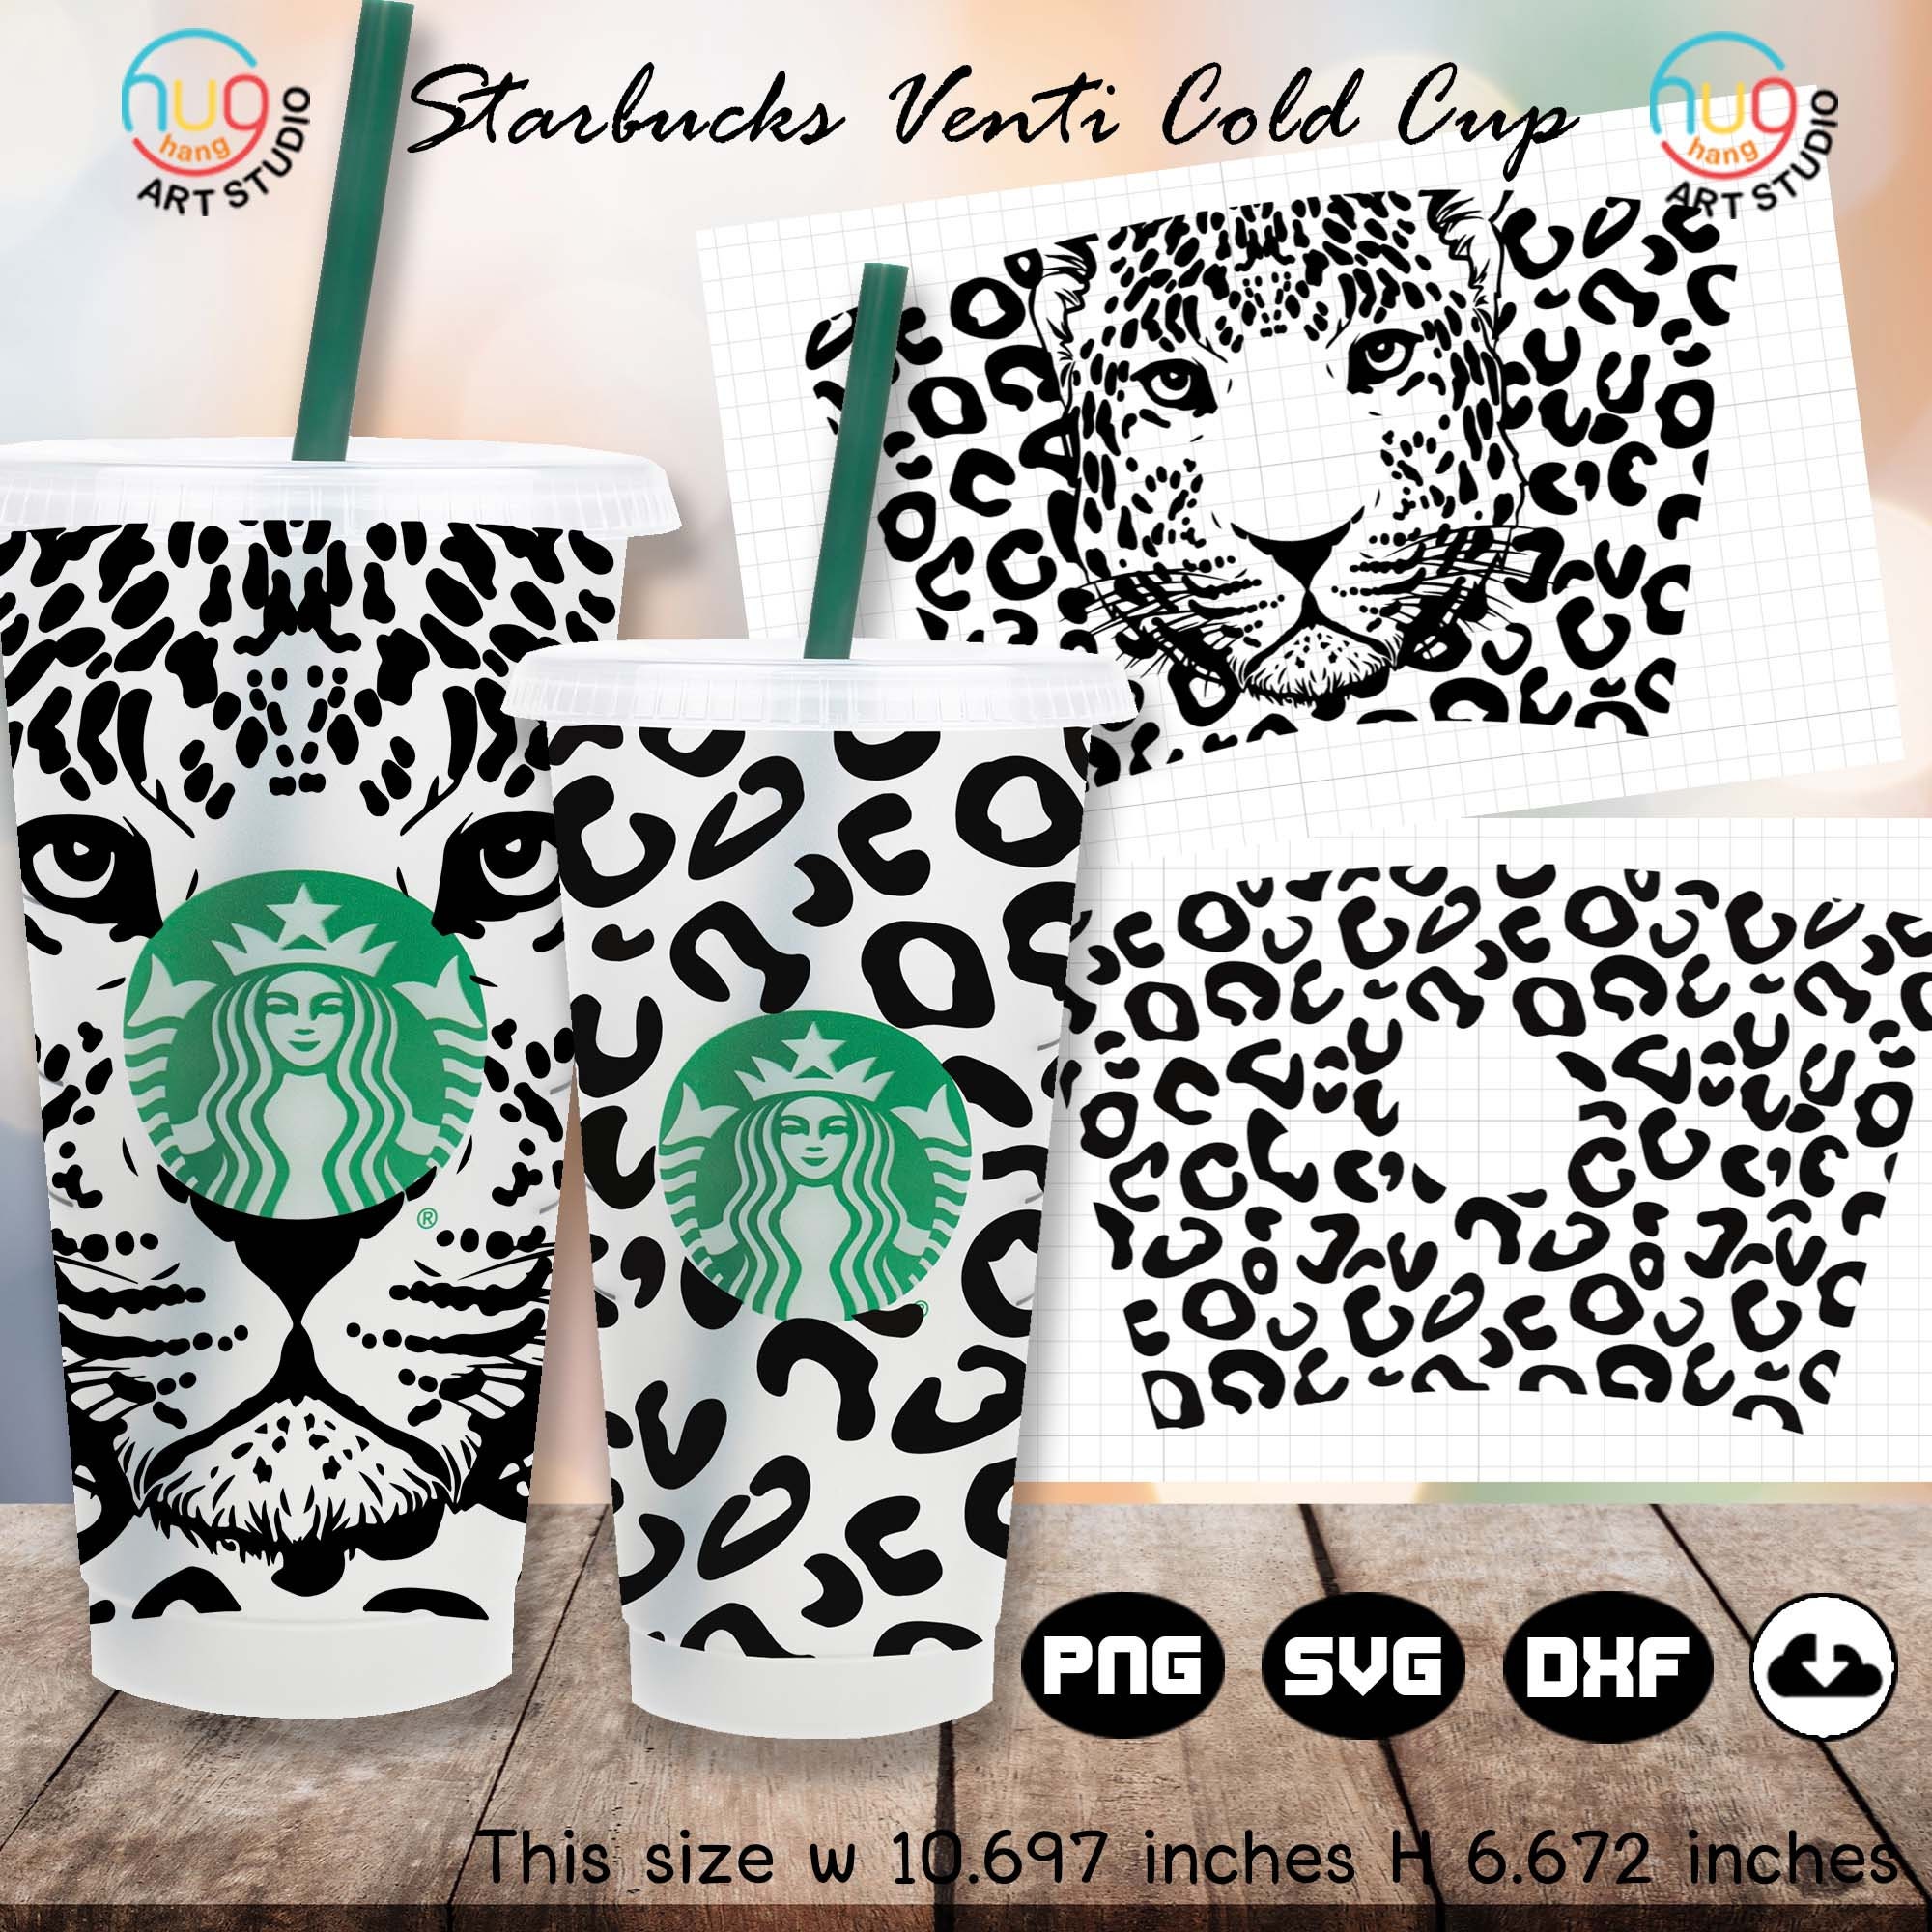 Leopard and Lips Starbucks Cold Cup Wrap SVG. Venti Cups By Olyate